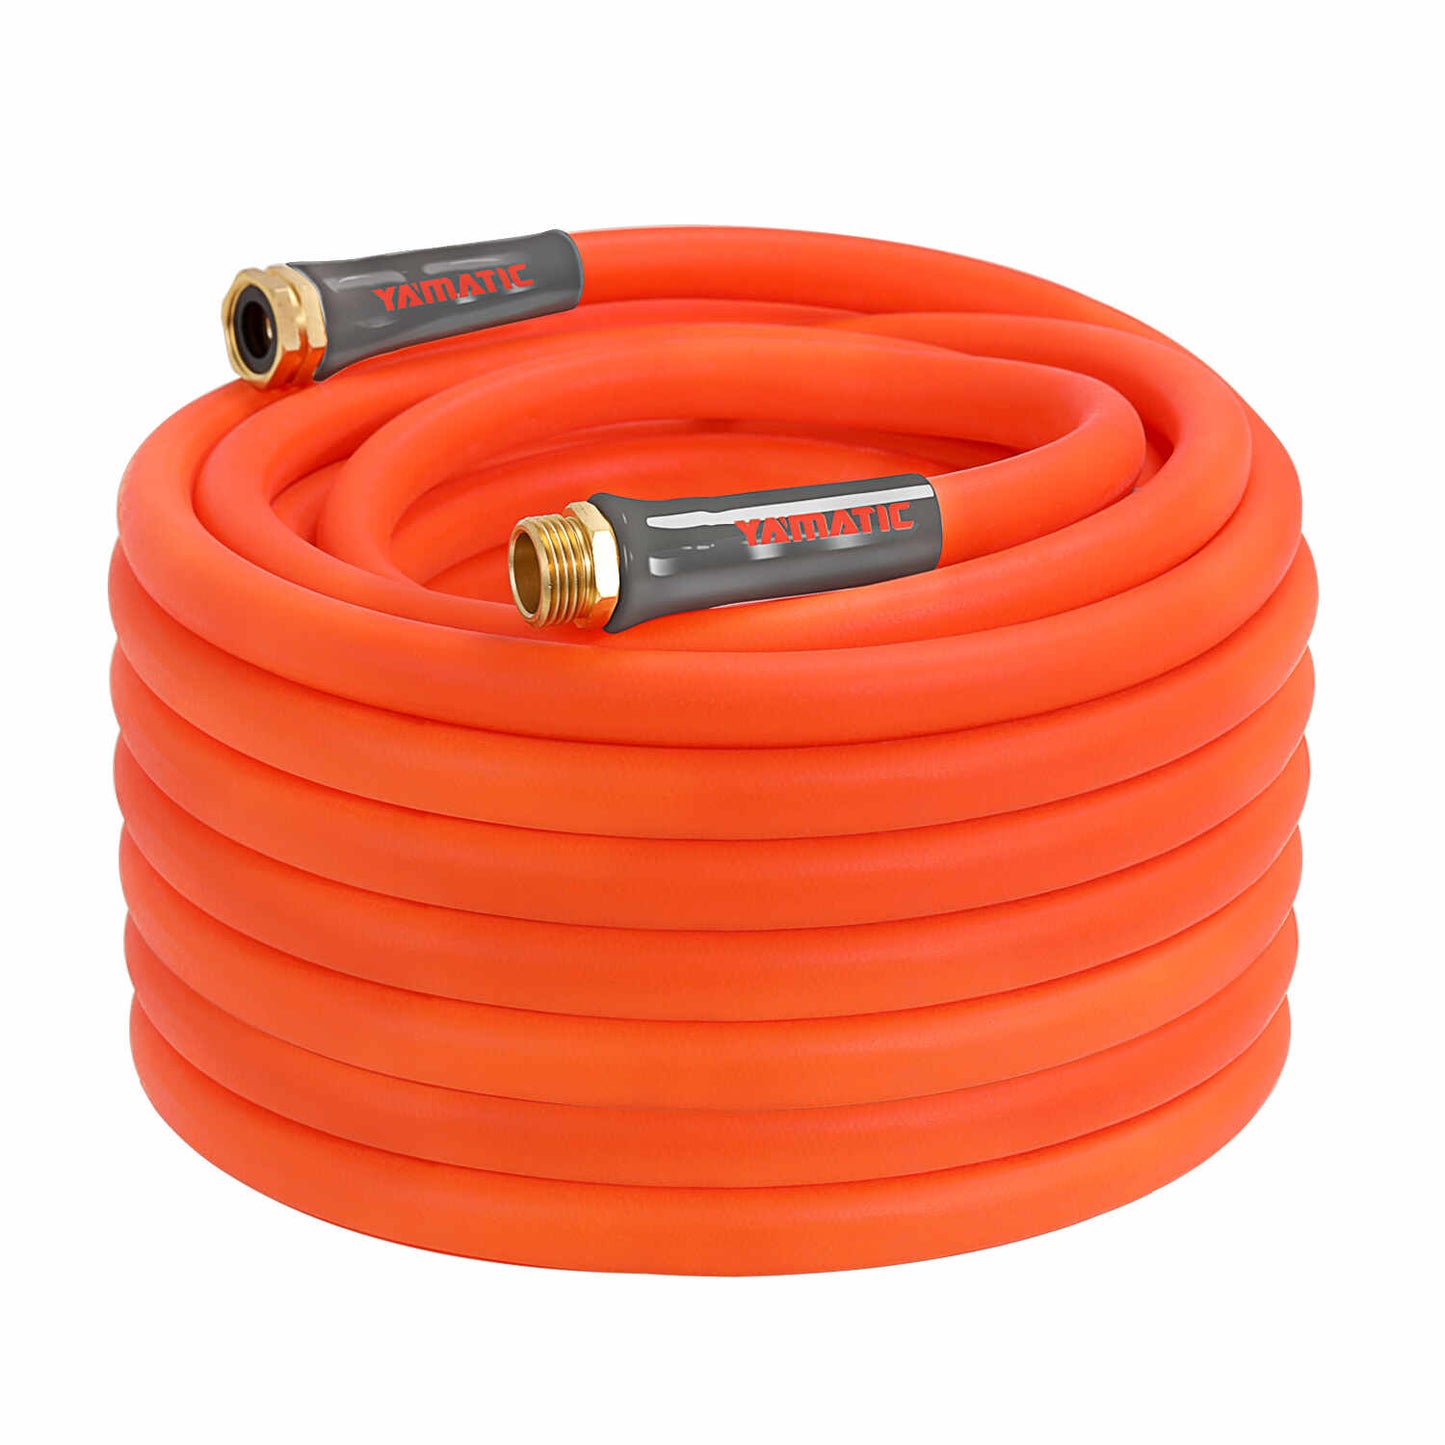 YAMATIC 5/8" Garden Hose 30ft, 50ft, 75ft, 100 Ft.  X 3/4" Connector All-Weather